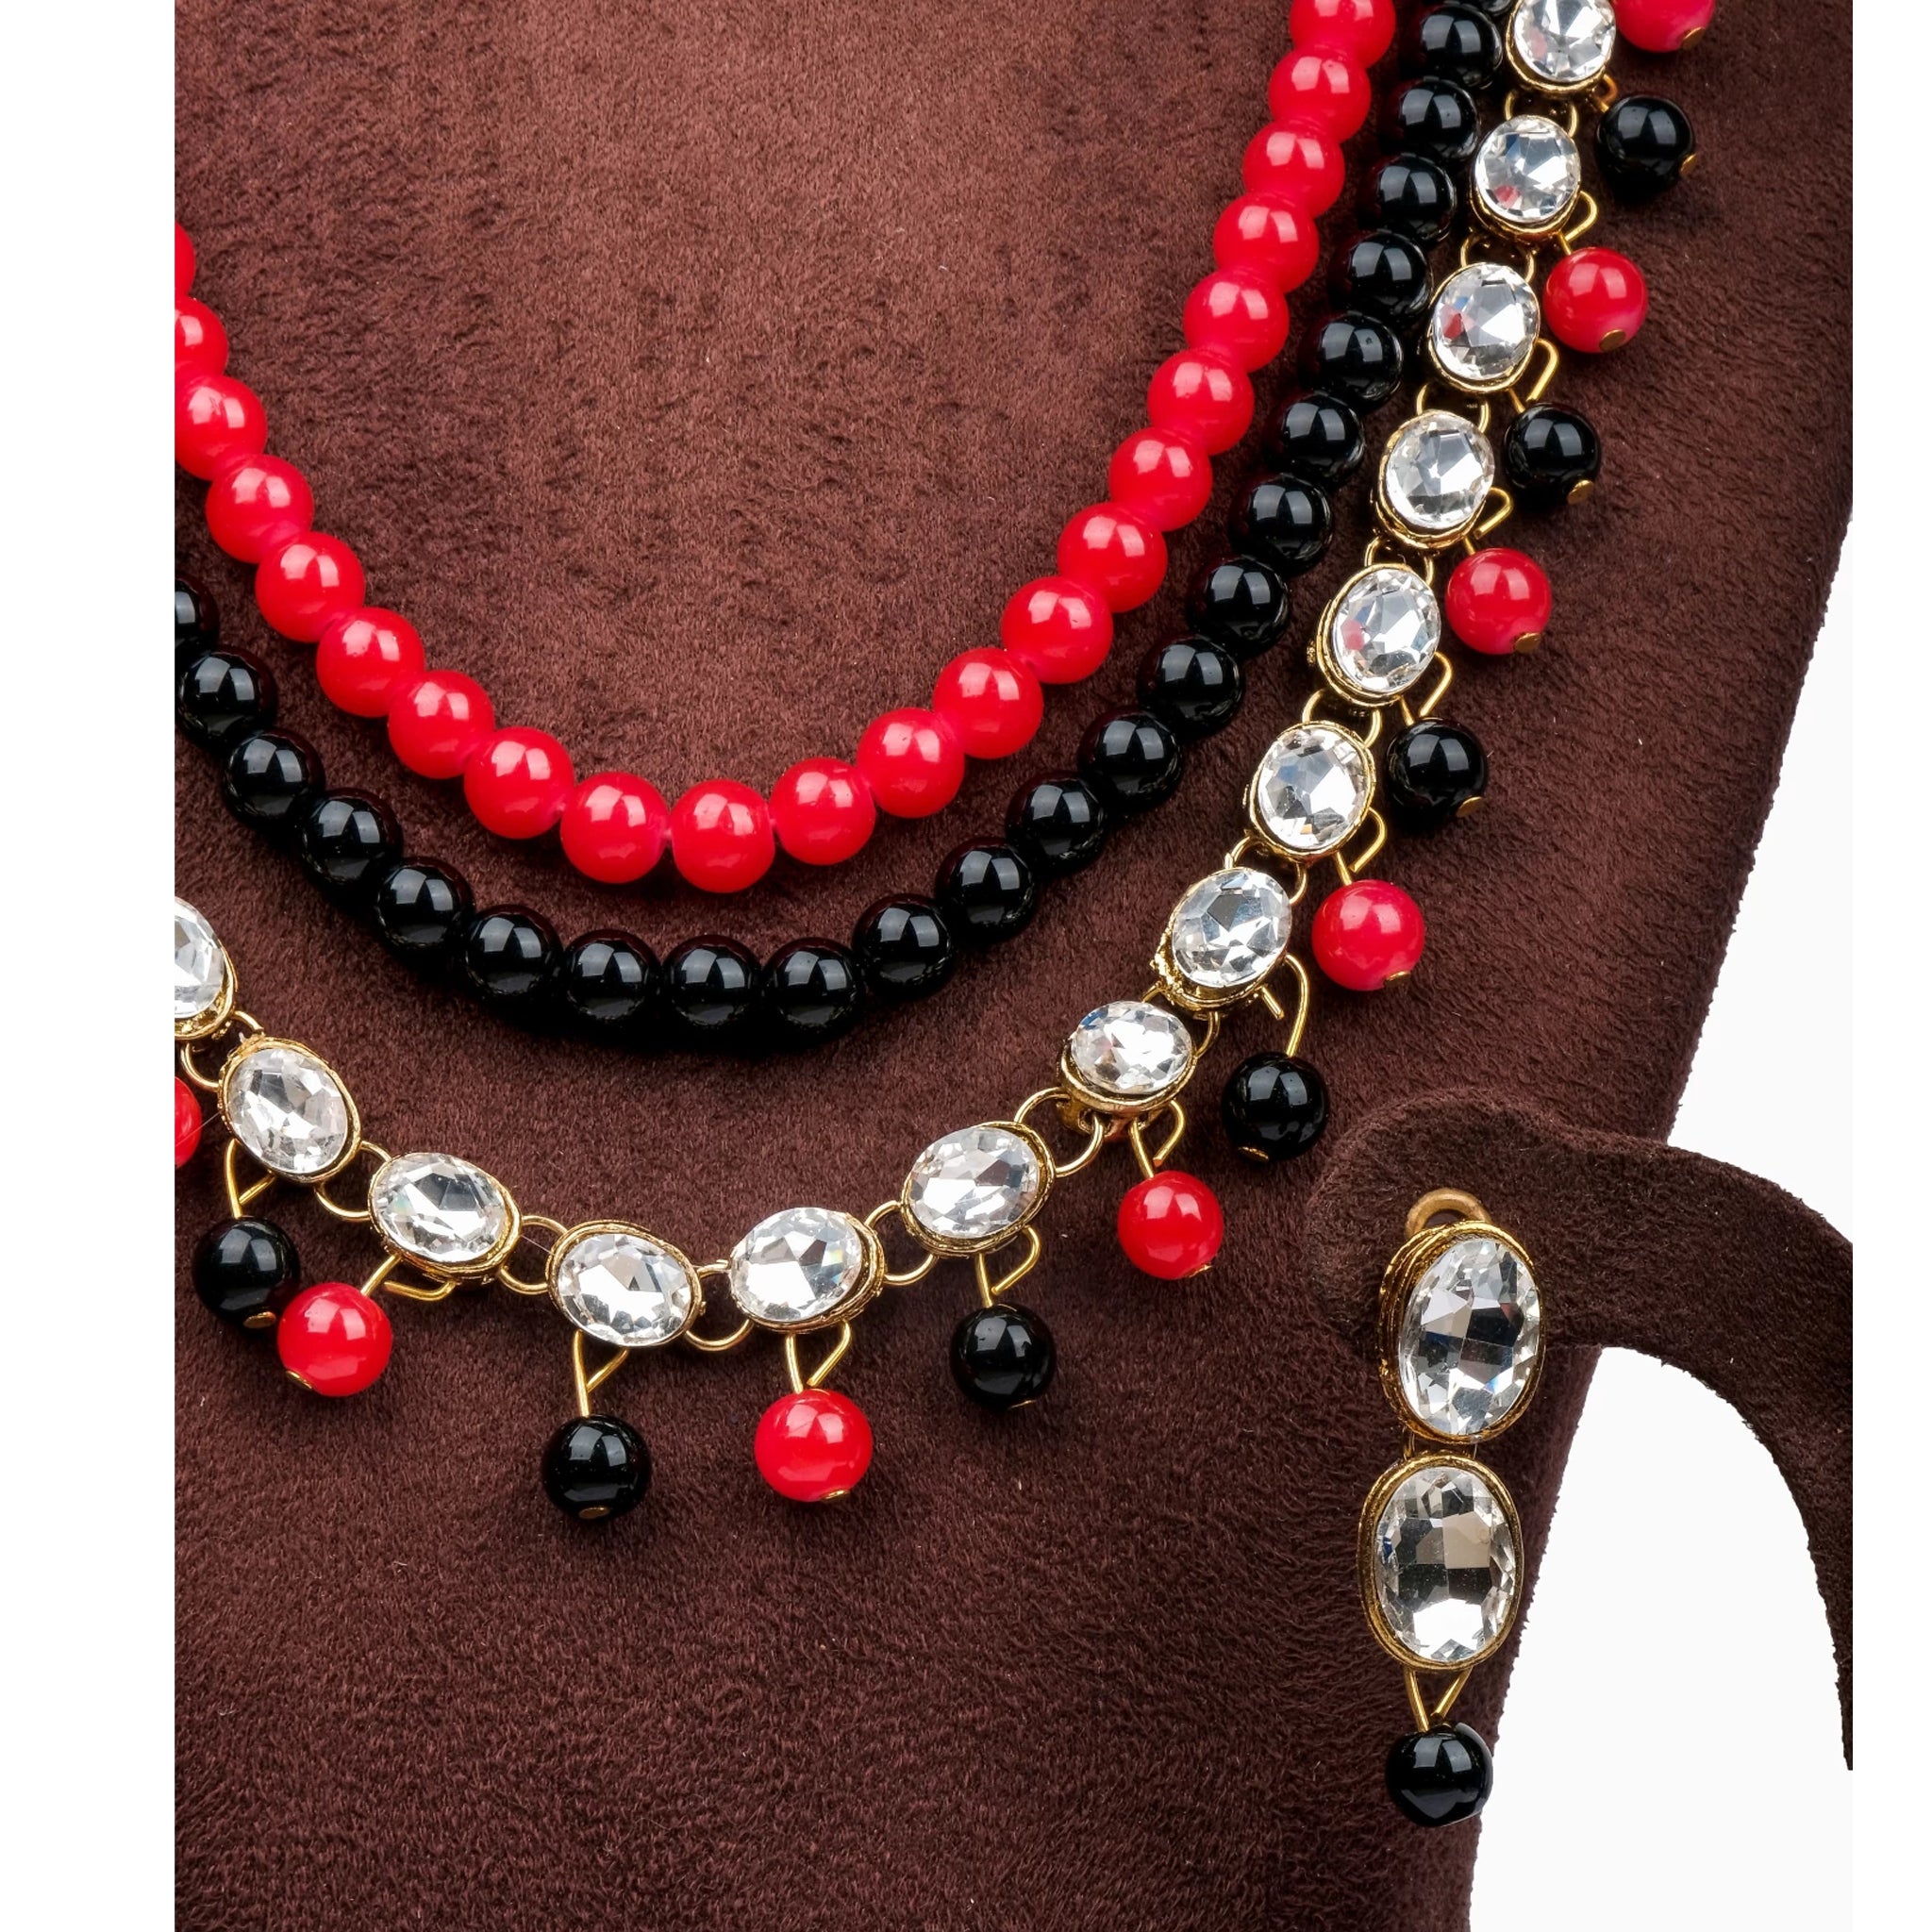 Buy JDS Oxidize Red Beaded Black Thread Necklace at Amazon.in